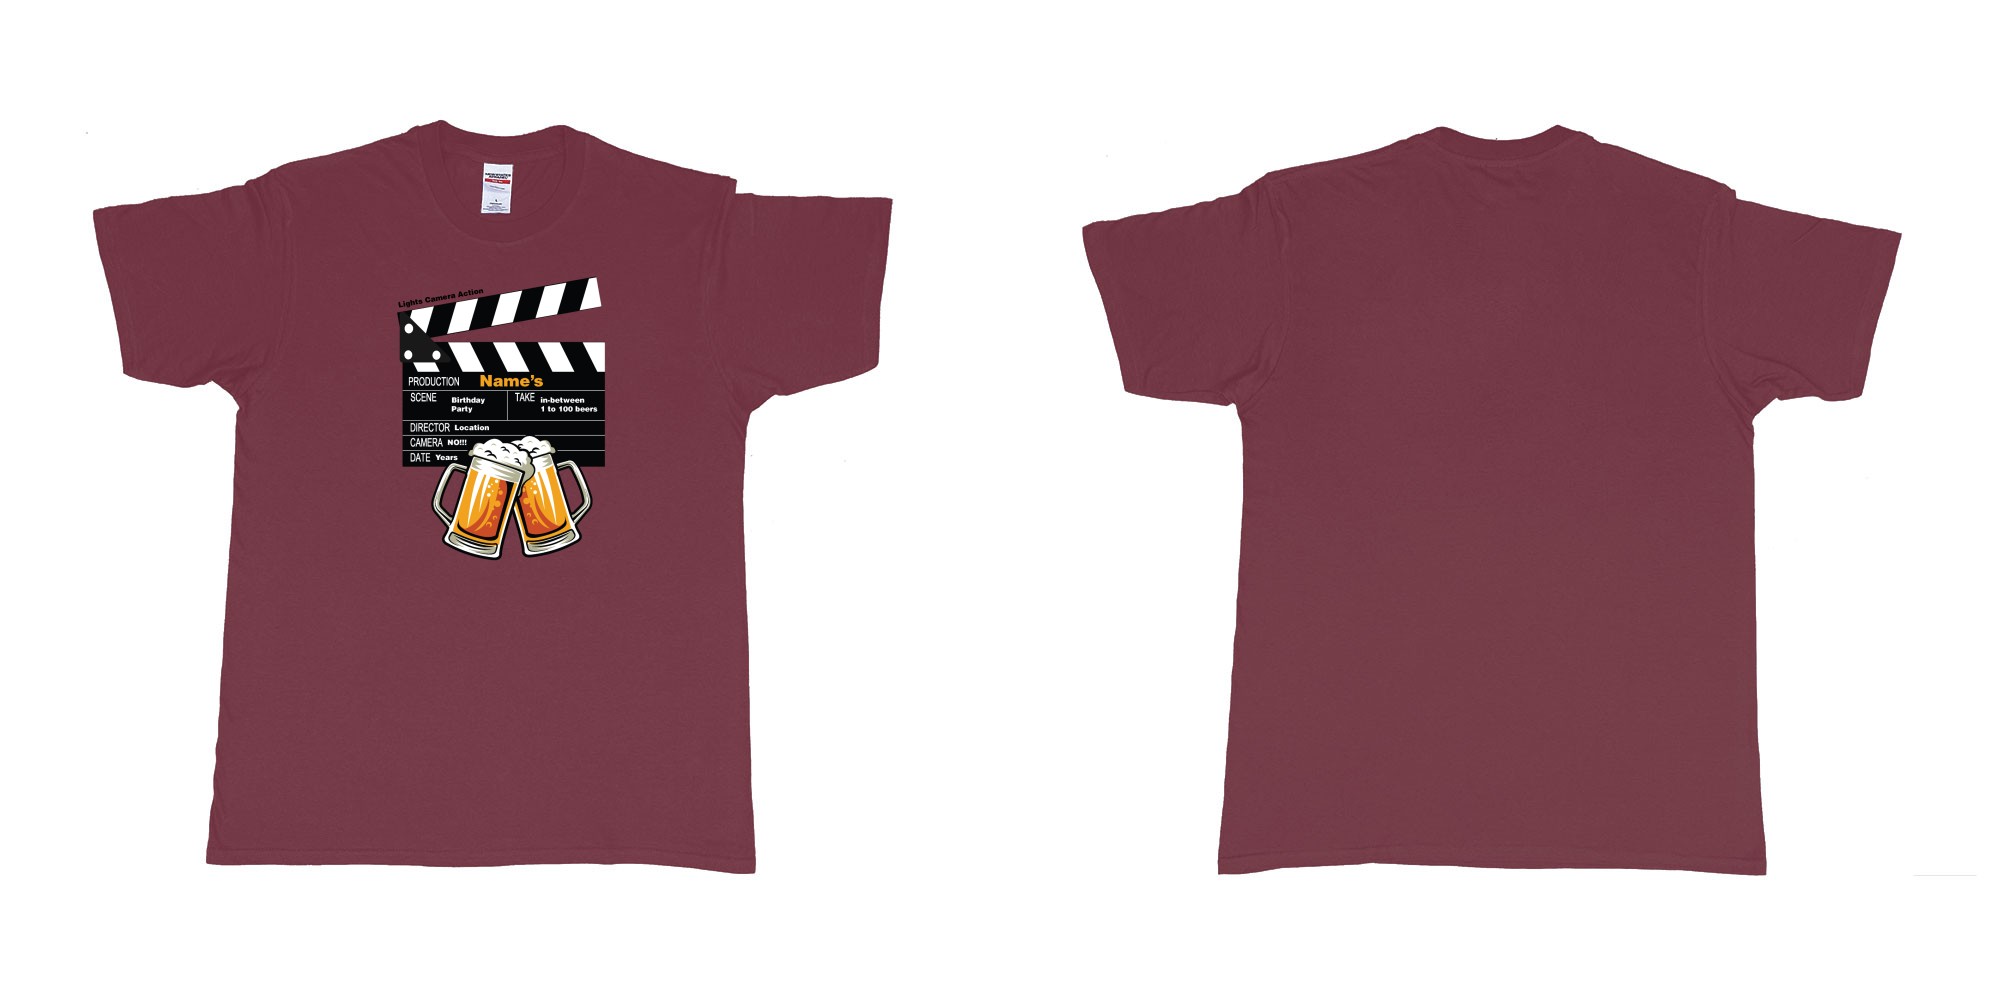 Custom tshirt design birthday beers movie clapperboard in fabric color marron choice your own text made in Bali by The Pirate Way